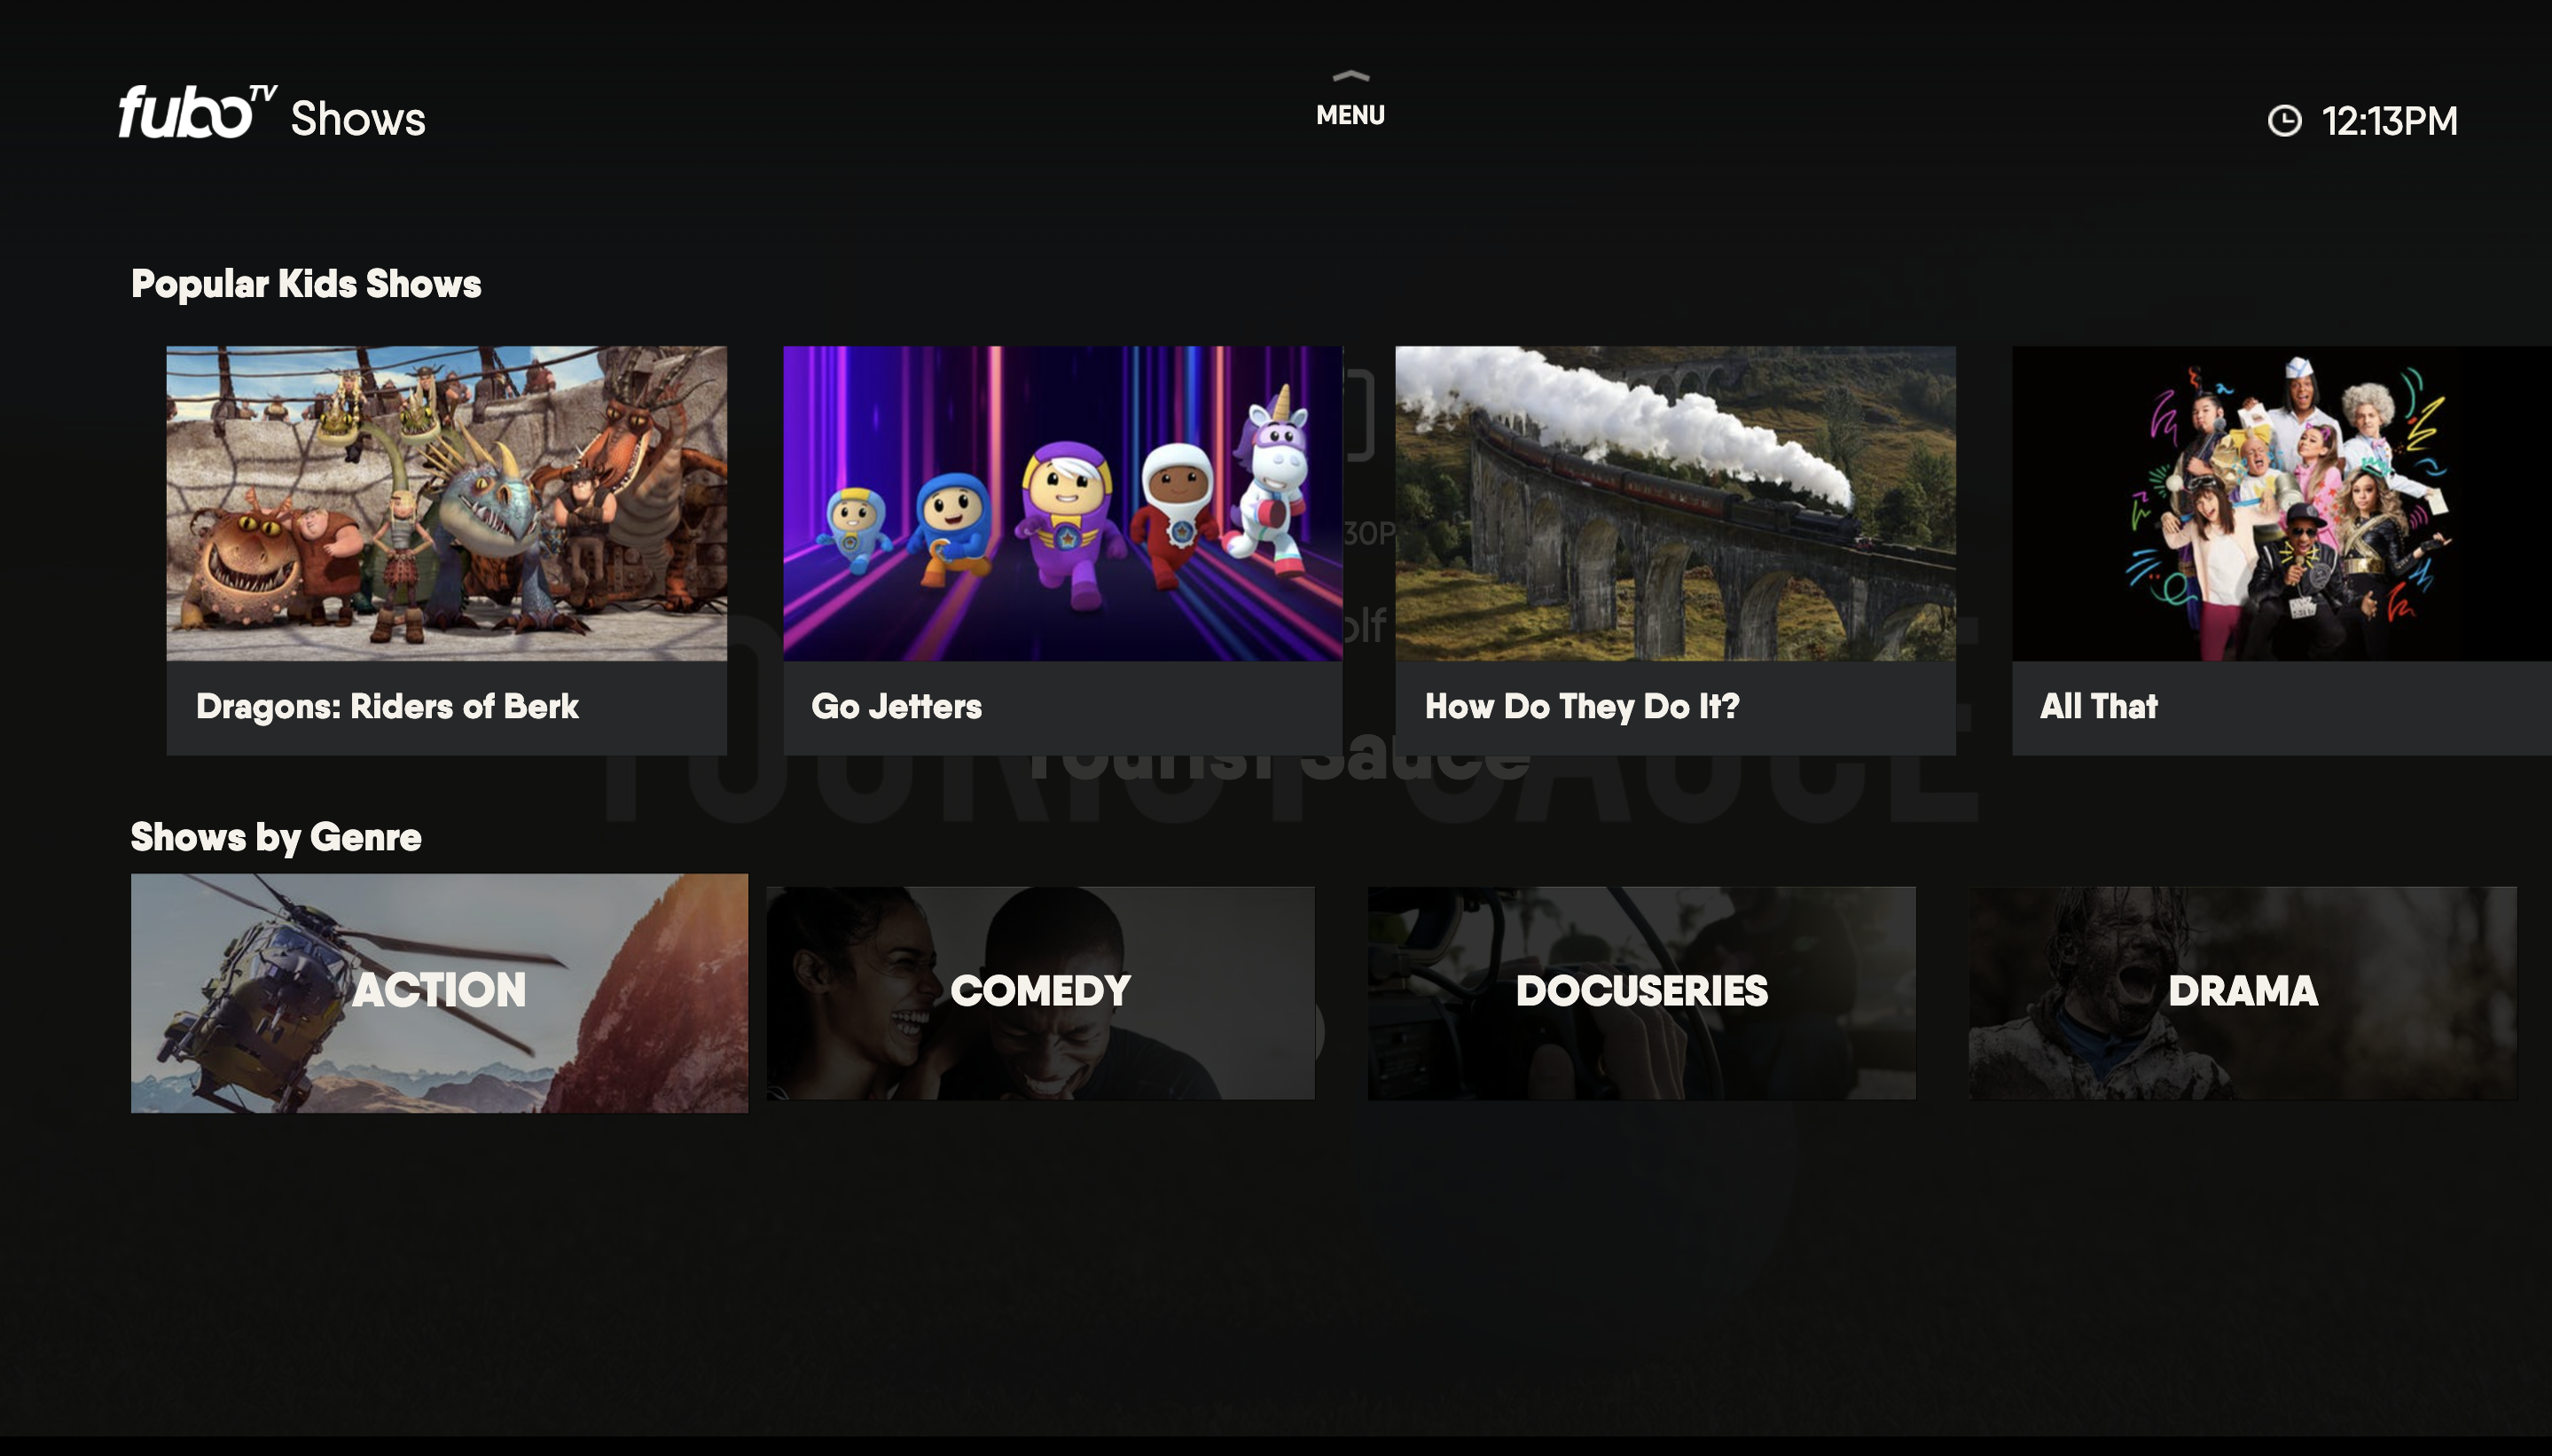 SHOWS screen of the FuboTV app on Xbox with genre filters highlighted